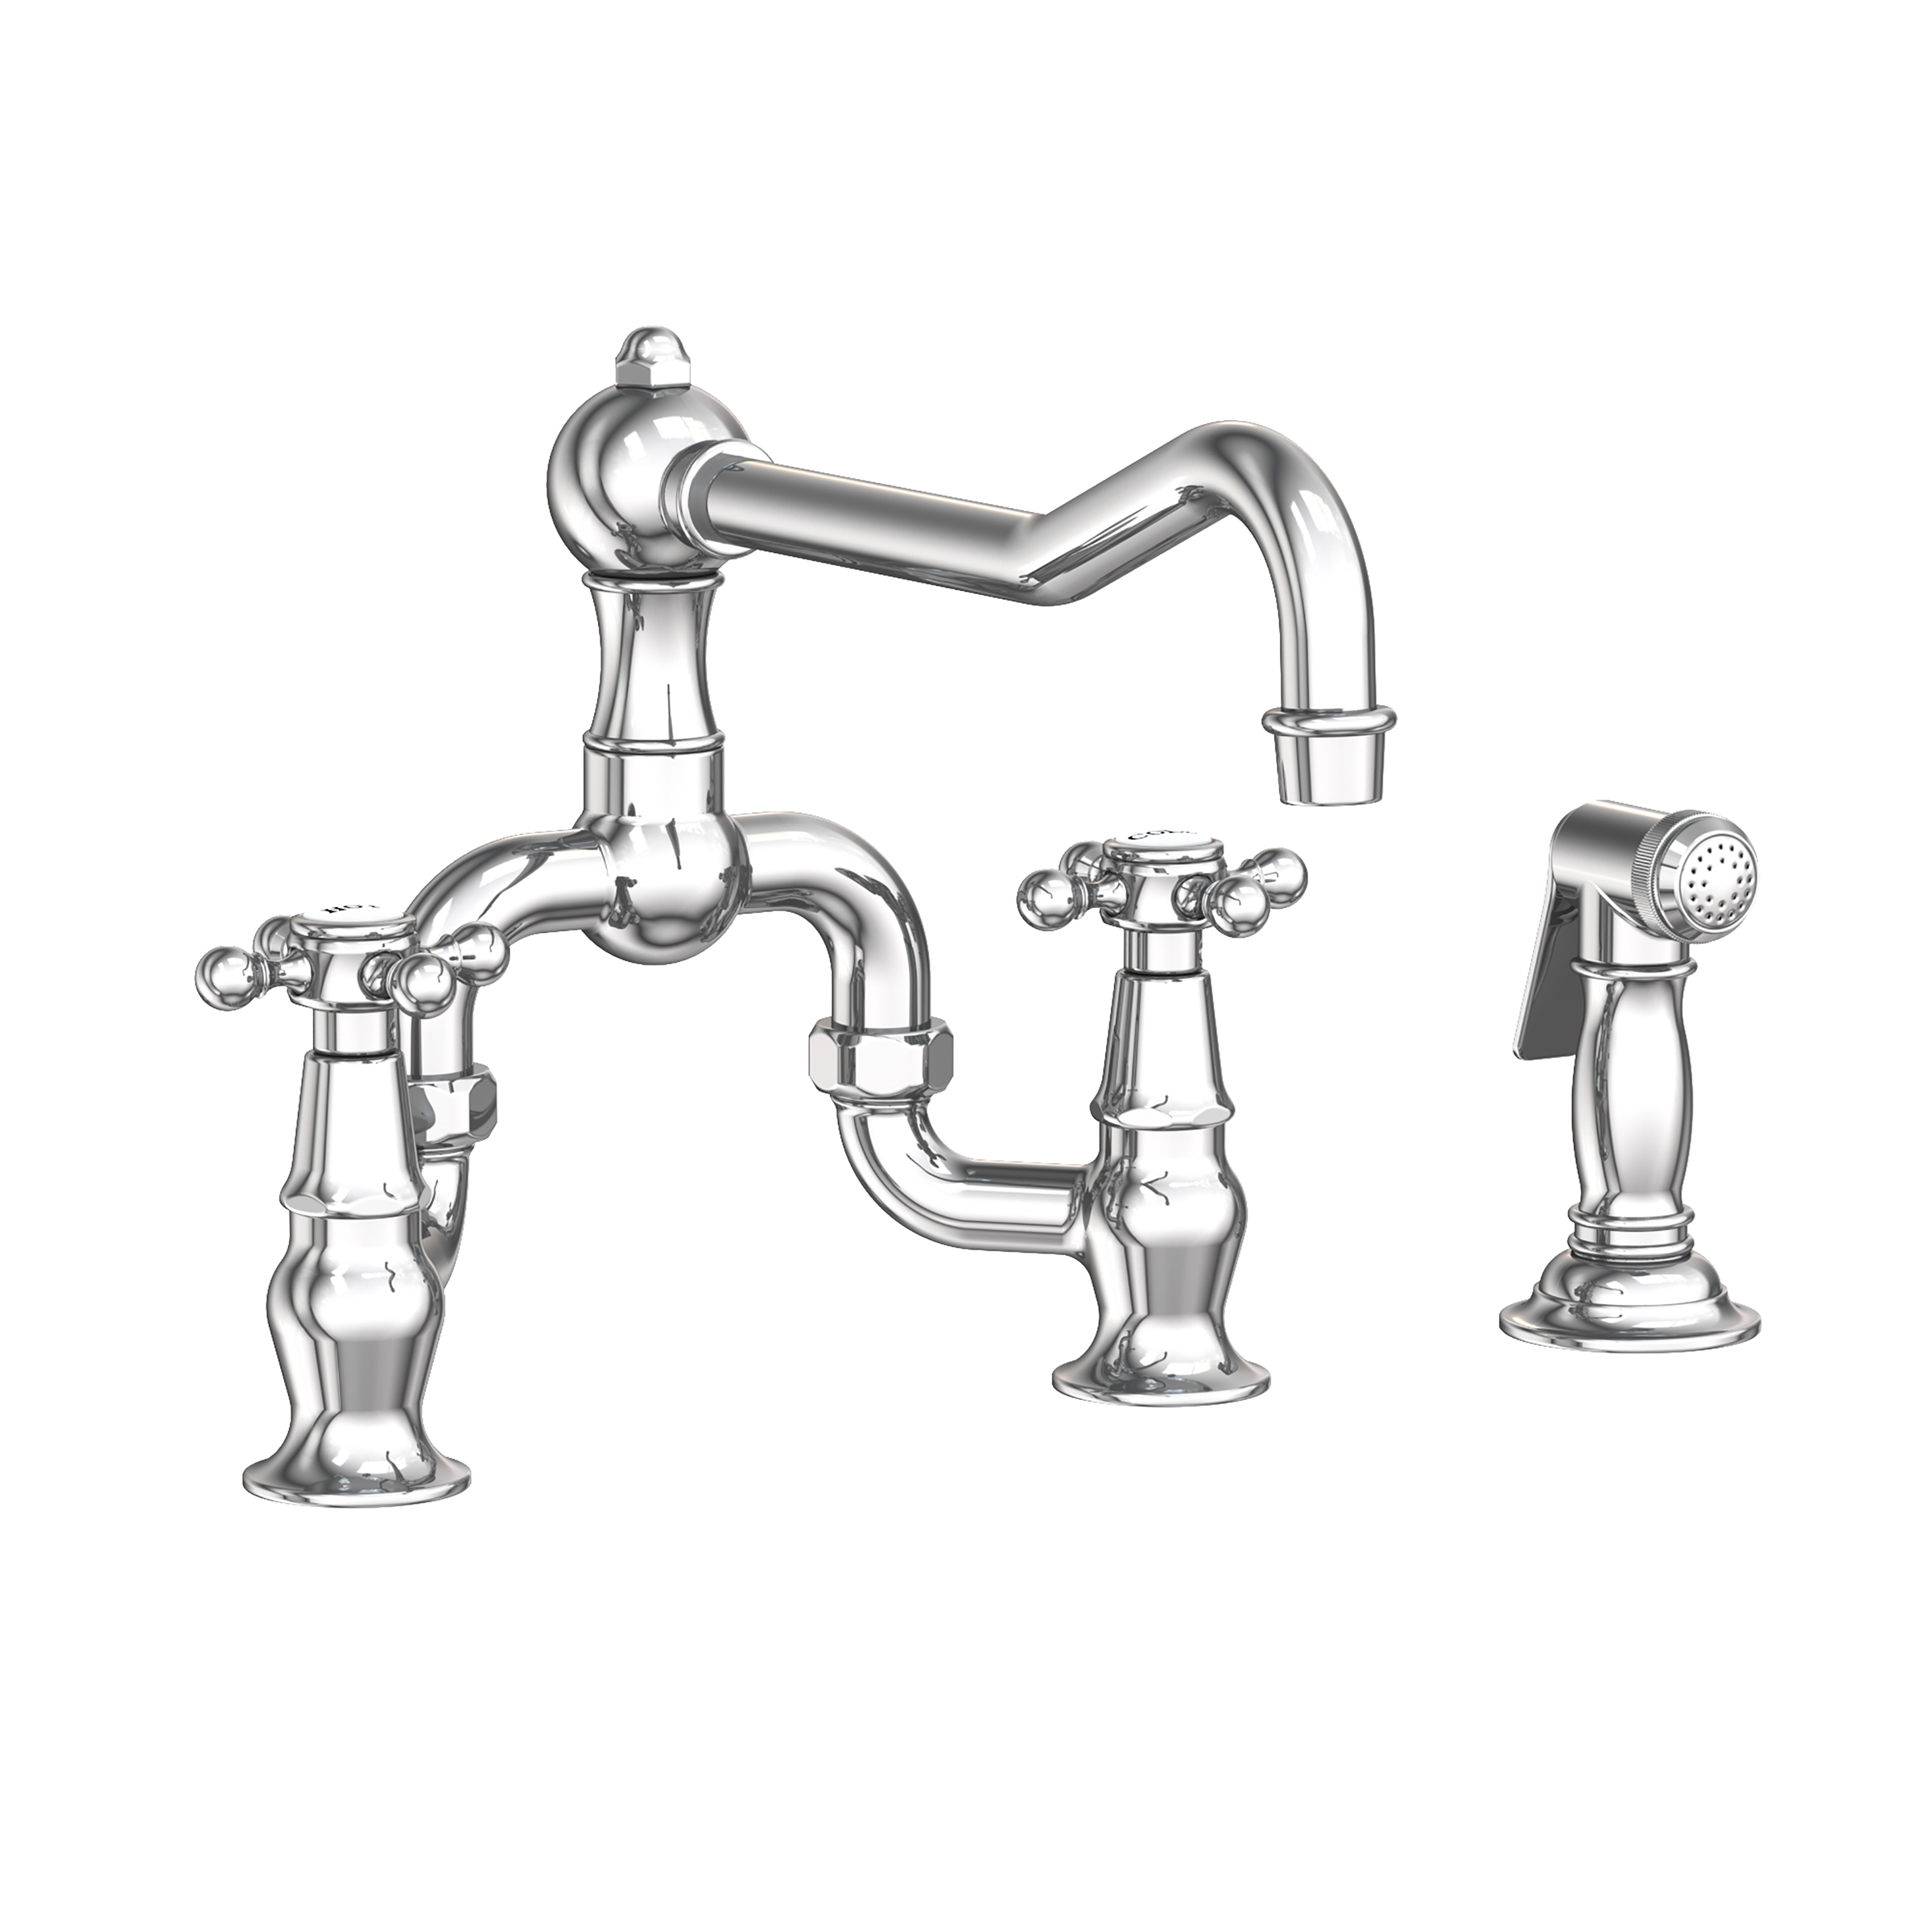 Newport Brass 9452-1 03N Chesterfield Double Handle Bridge Kitchen Faucet with Side Spray and Metal Cross, Polished Brass Uncoated - 3